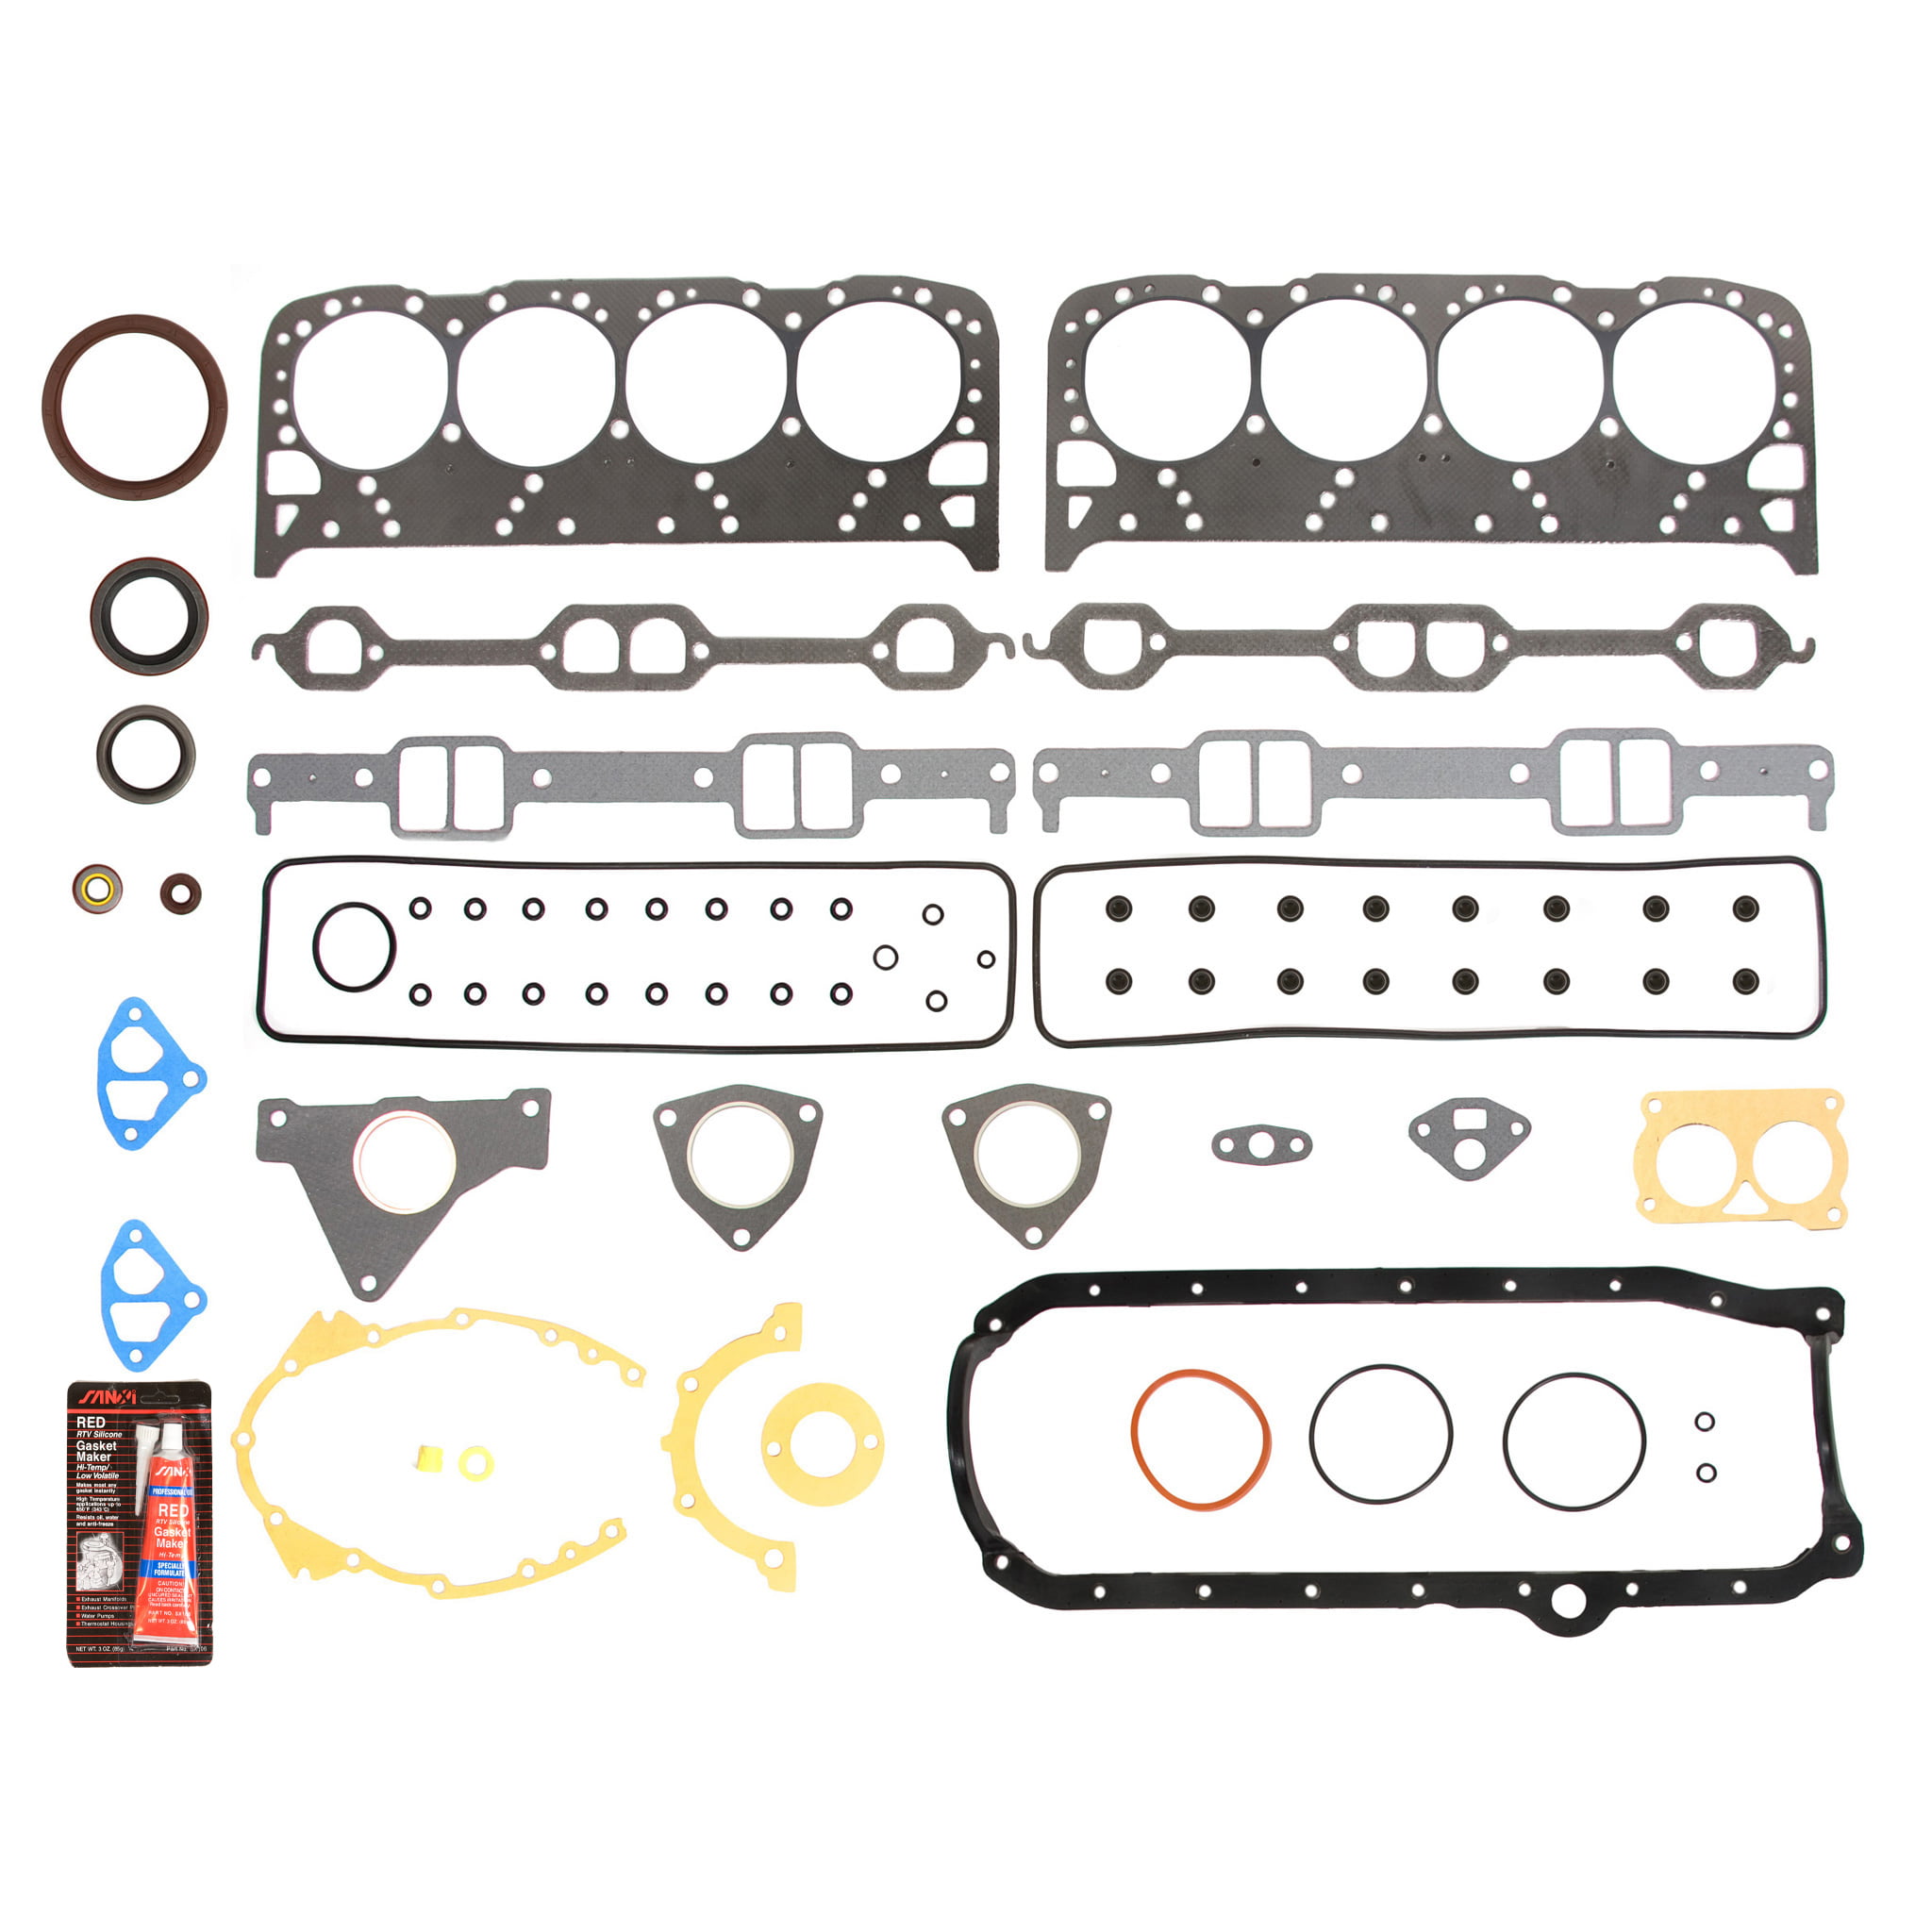 Compatible With 93-97 Chevrolet Pontiac Cadillac Buick 5.7 350 OHV LT-1 LT-4 Full Gasket Set